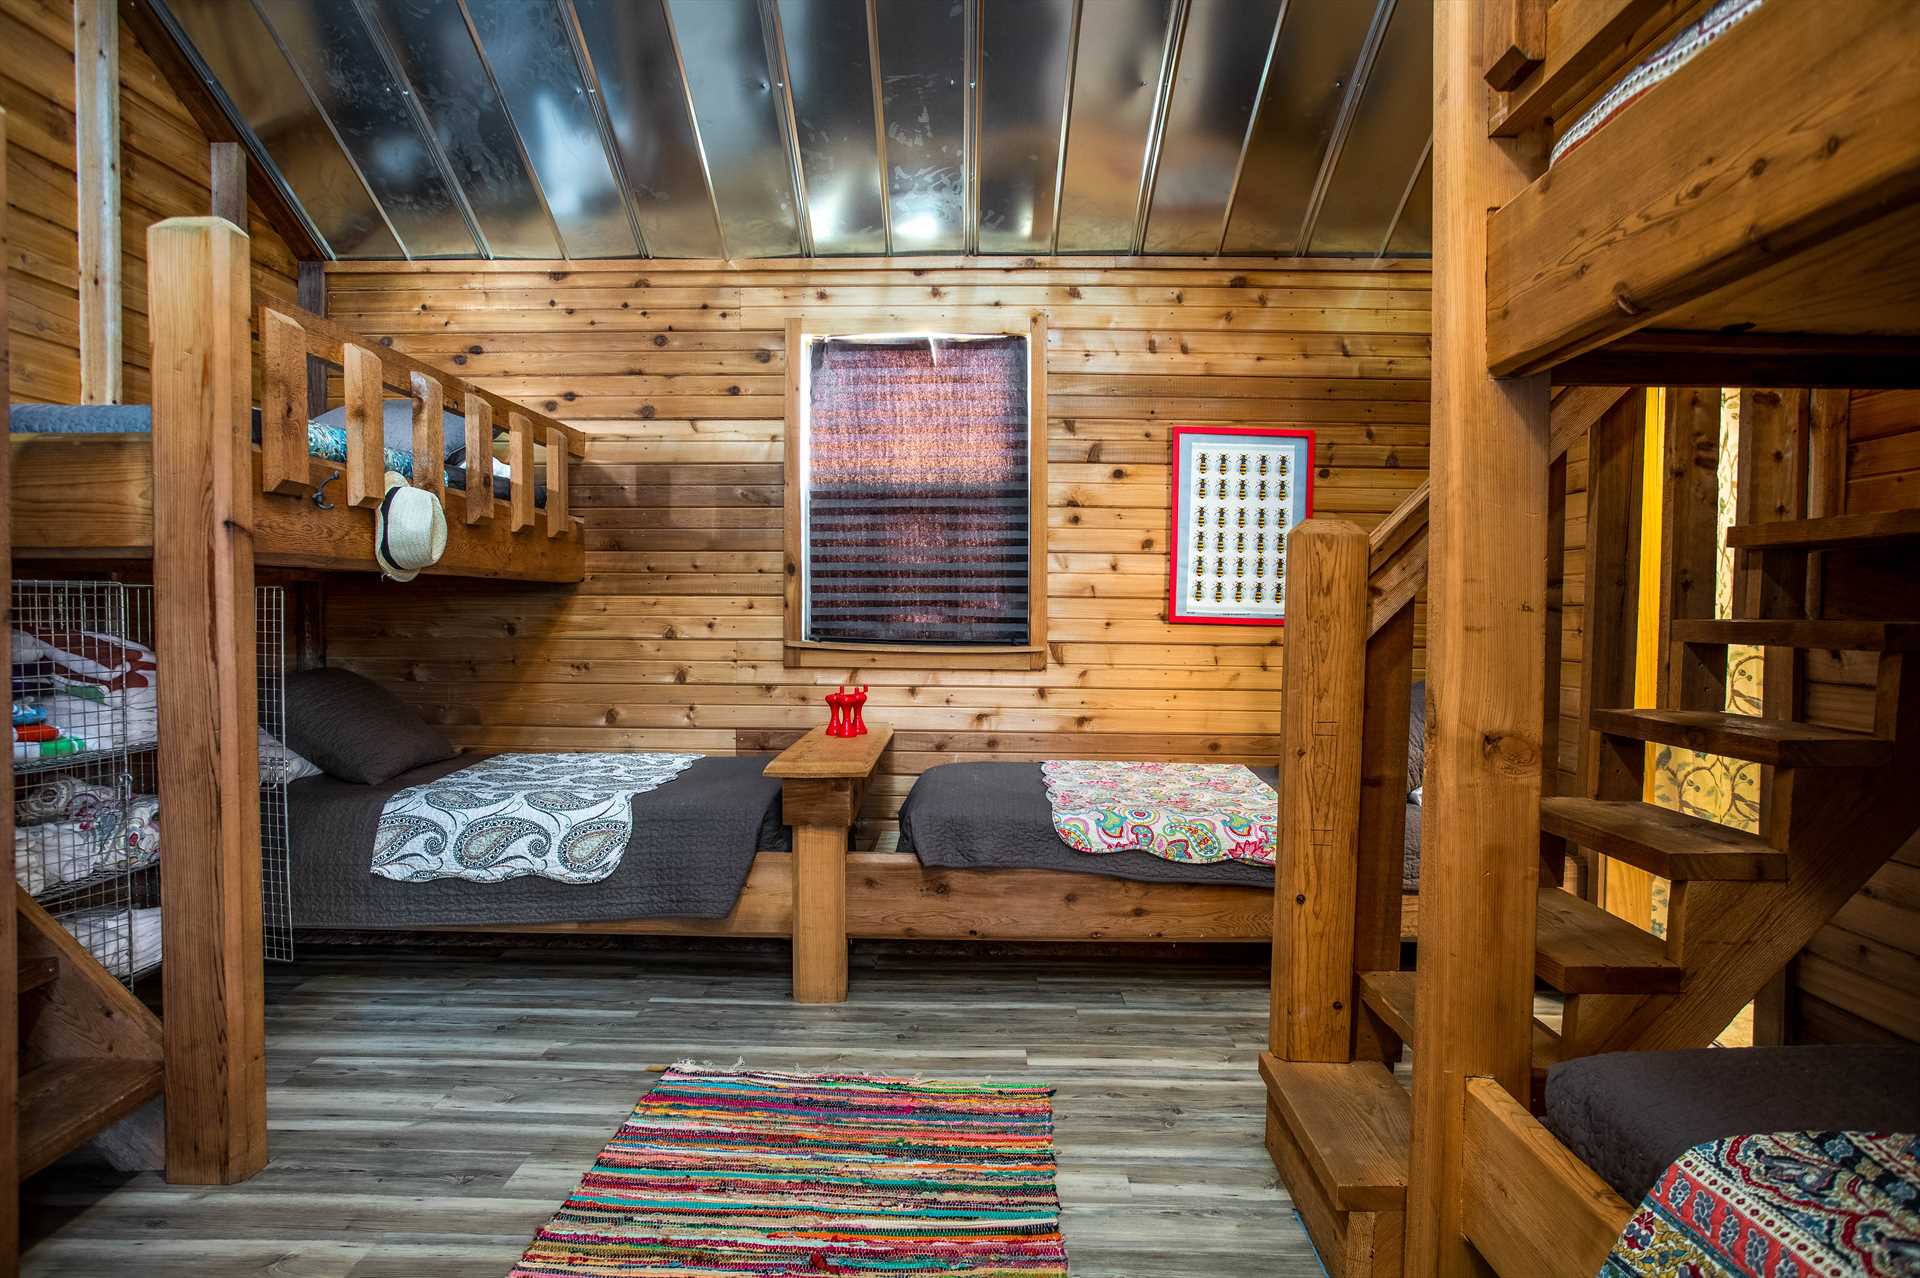                                                 Seven, count them-seven over-sized twin beds give the third bedroom a fun and comfortable bunkhouse feel!